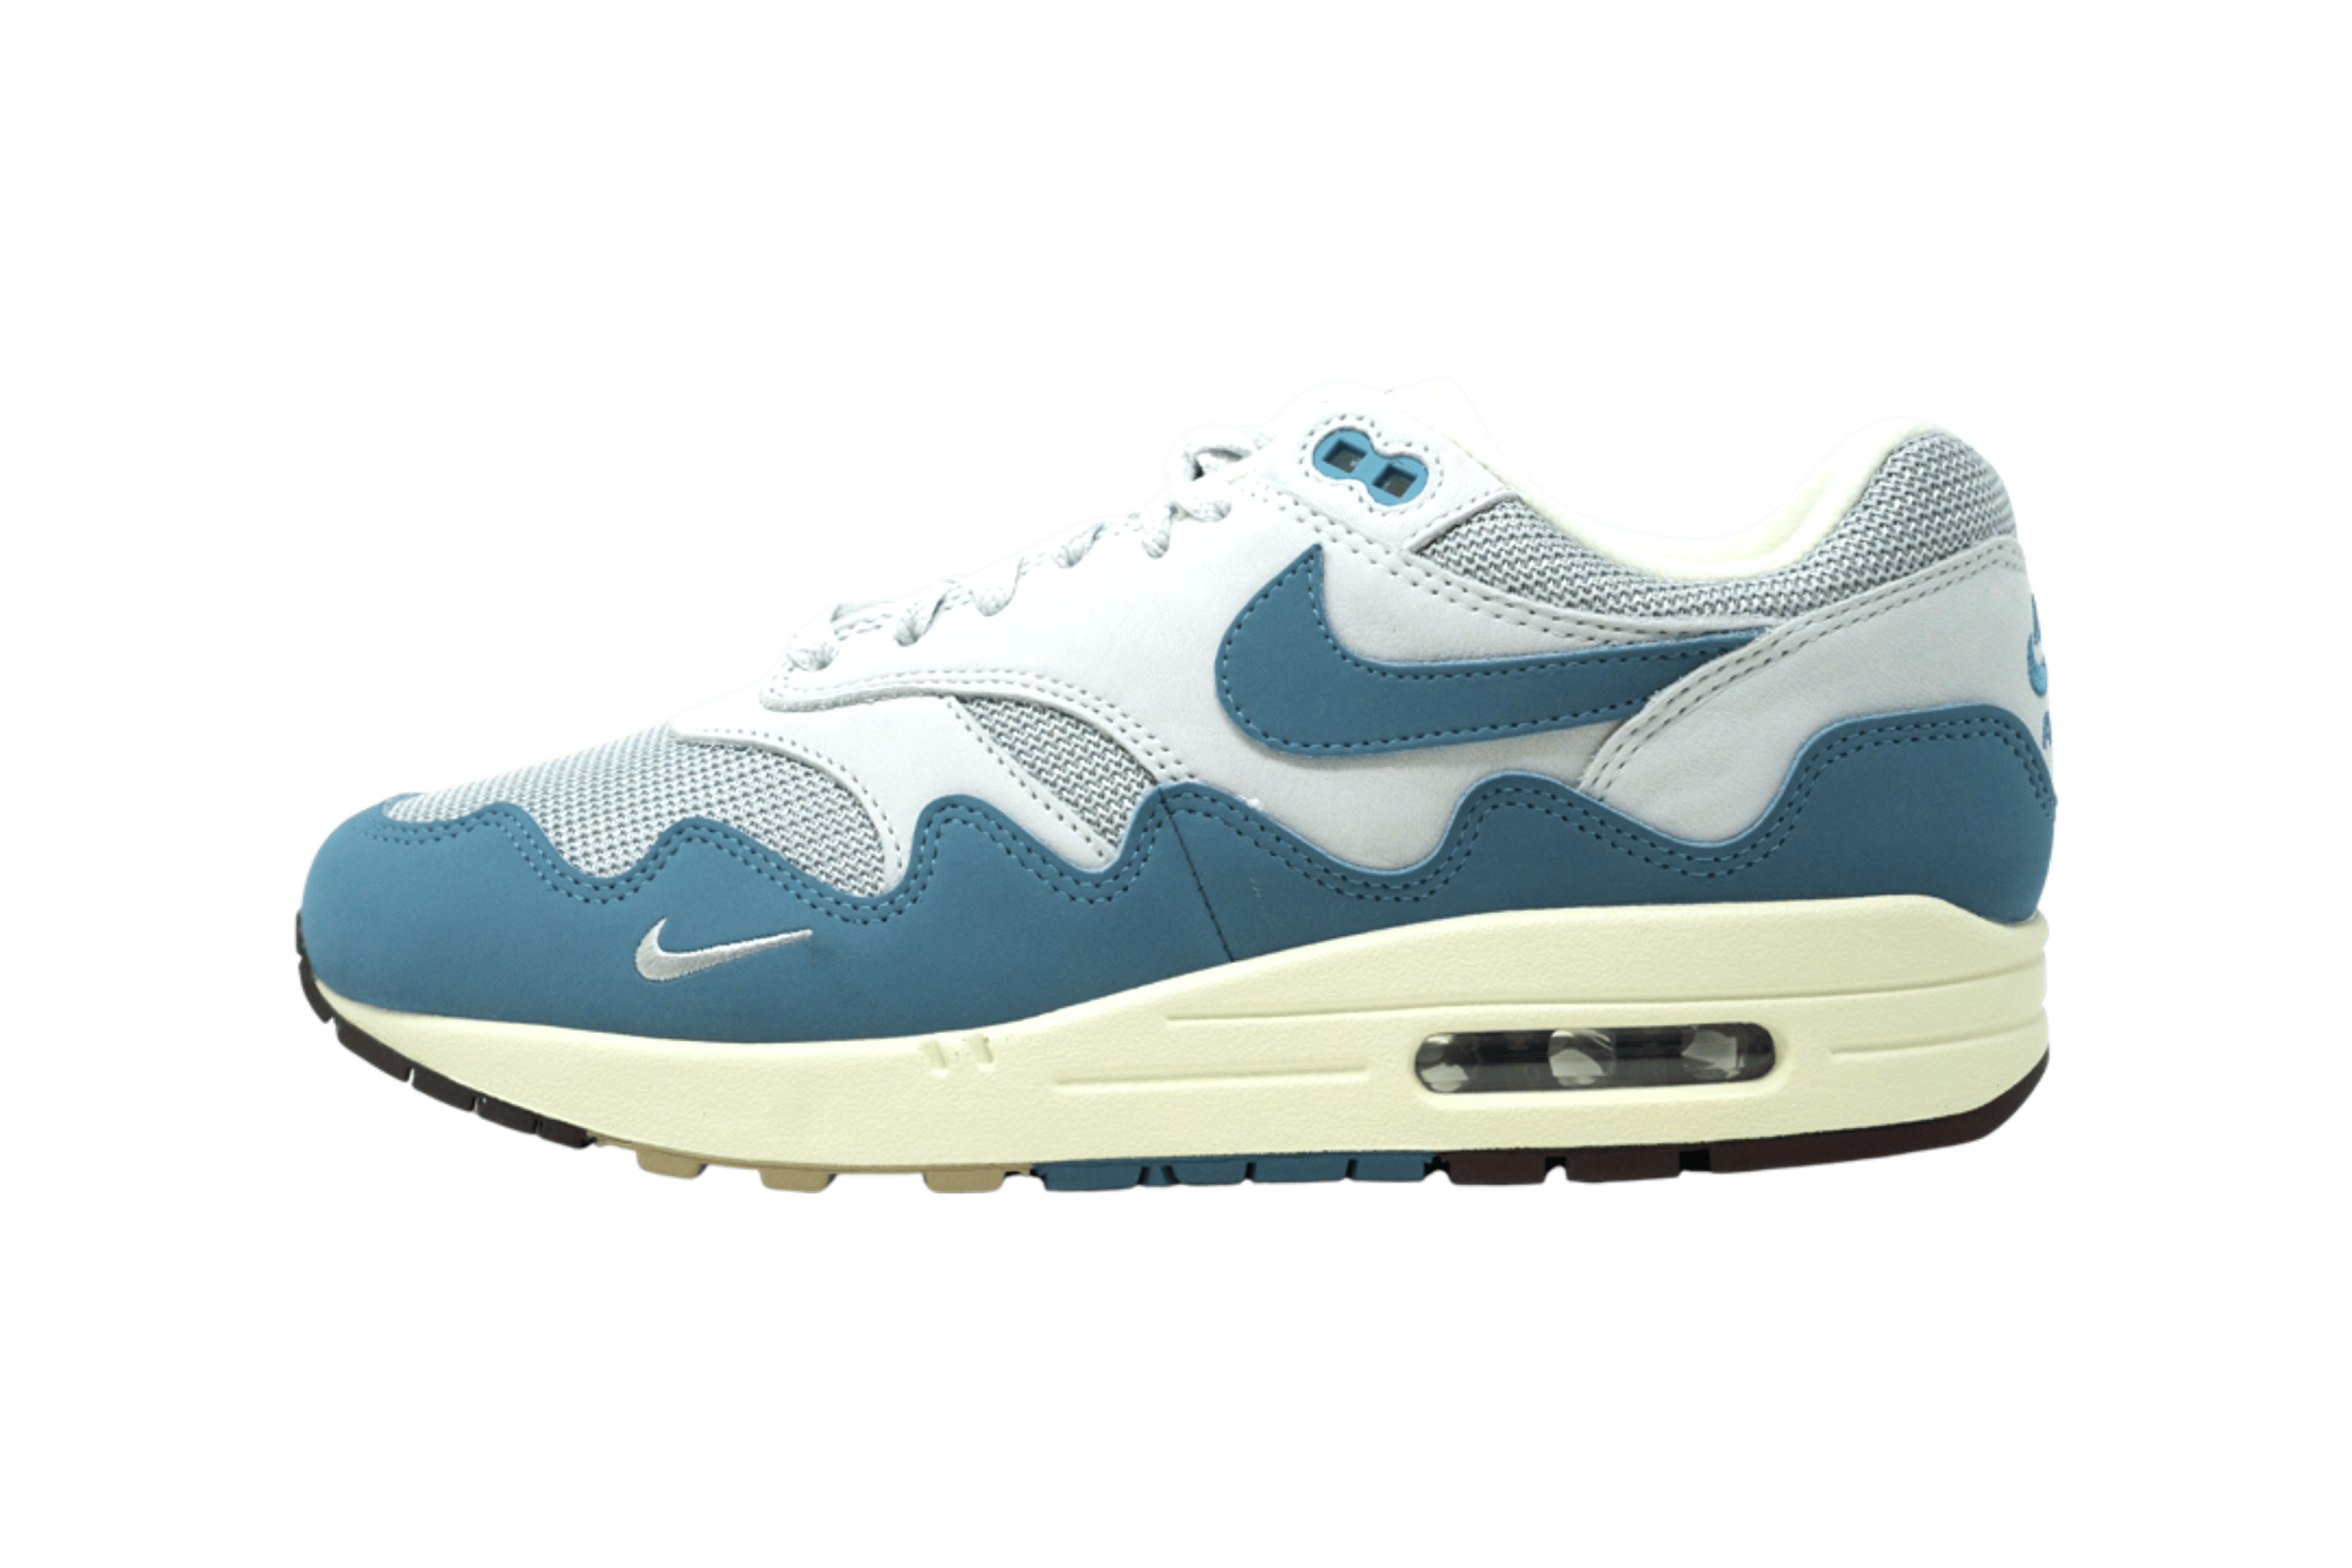 Alternate View 2 of Nike Air Max 1 Patta Waves Noise Aqua (with Bracelet)